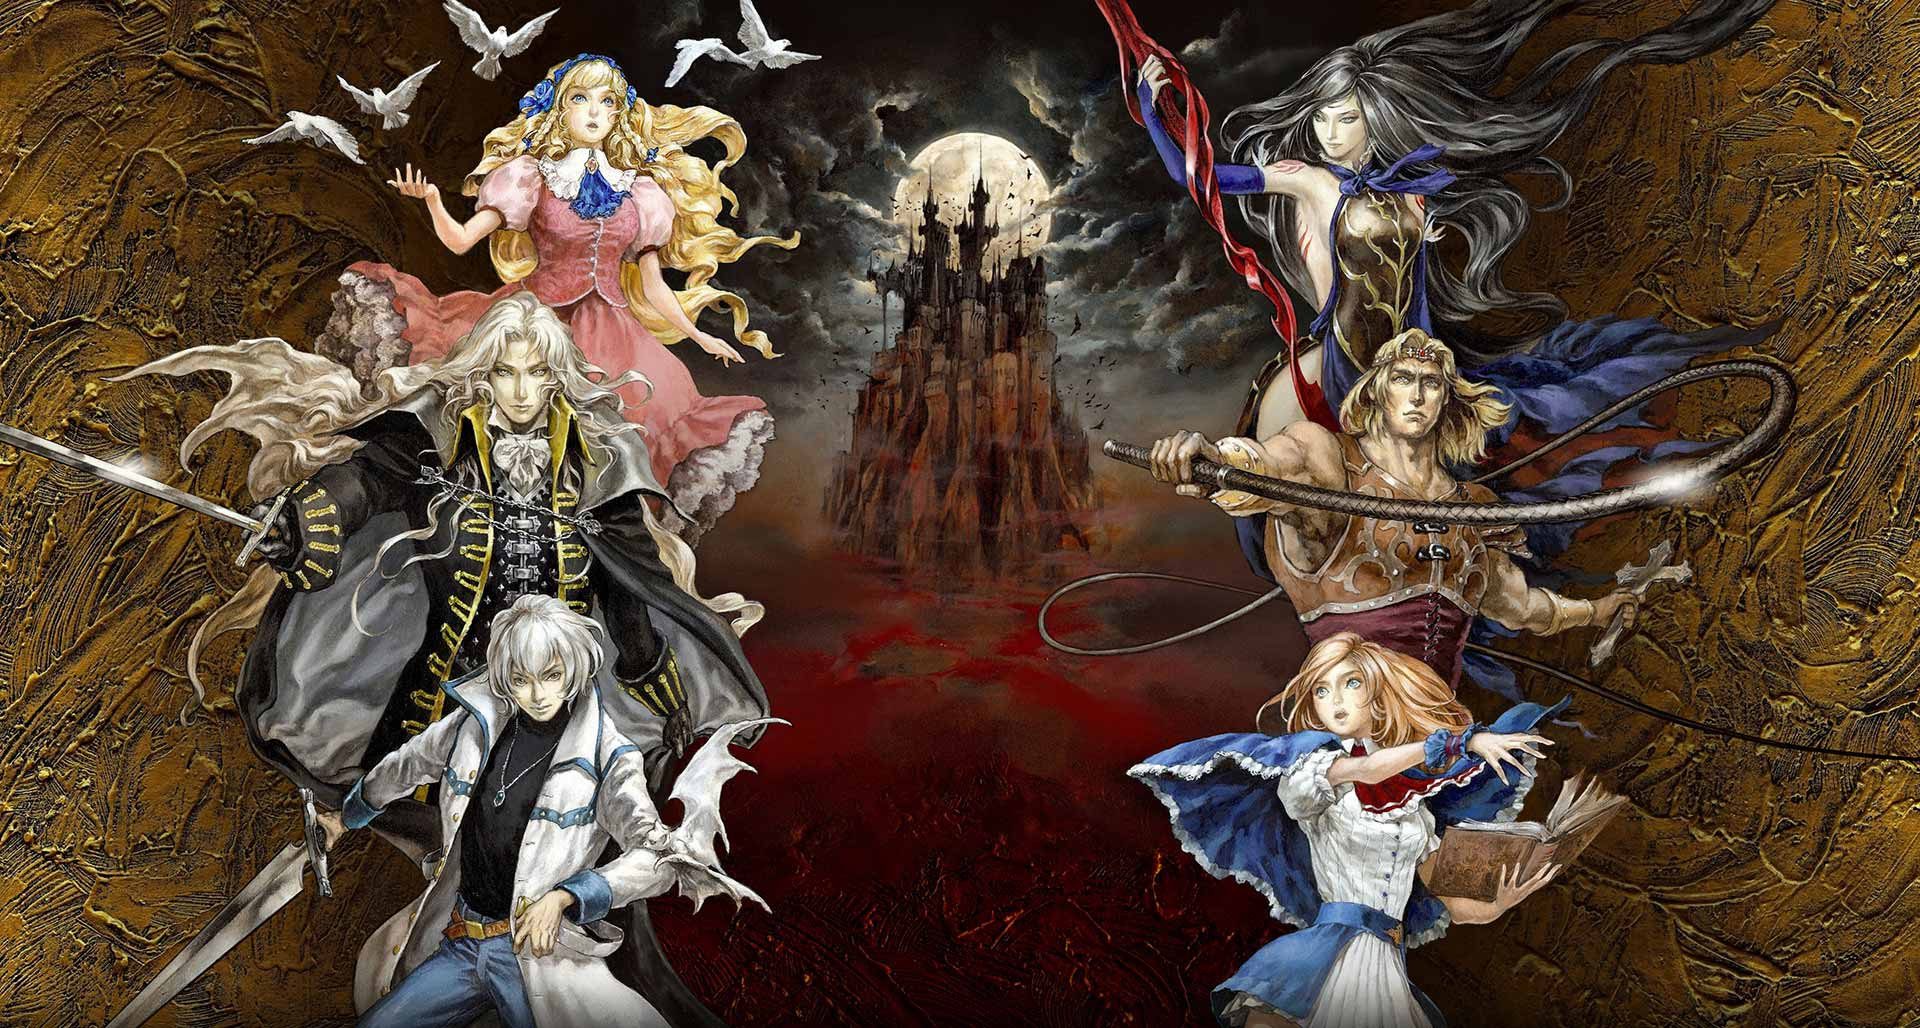 Castlevania: Grimoire of Souls wallpaper featuring iconic series characters